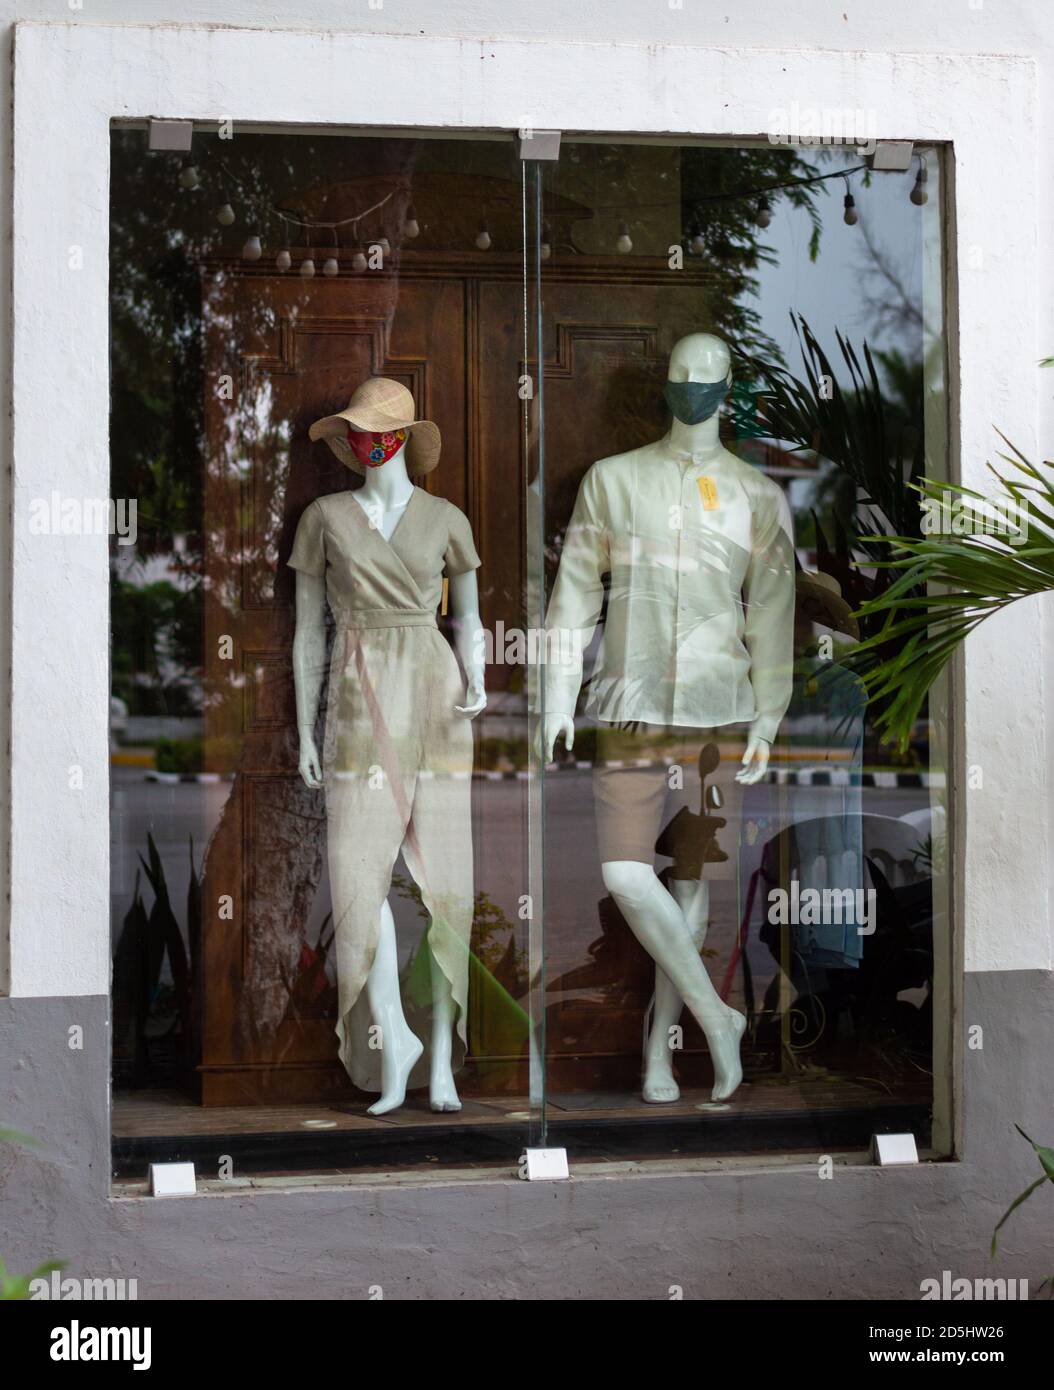 Covid 19 Pandemic in Mexico, New normal trends. Boutique in Merida, Yucatan, mannequins wearing Mexican fashion and face masks in a touristy area. Stock Photo